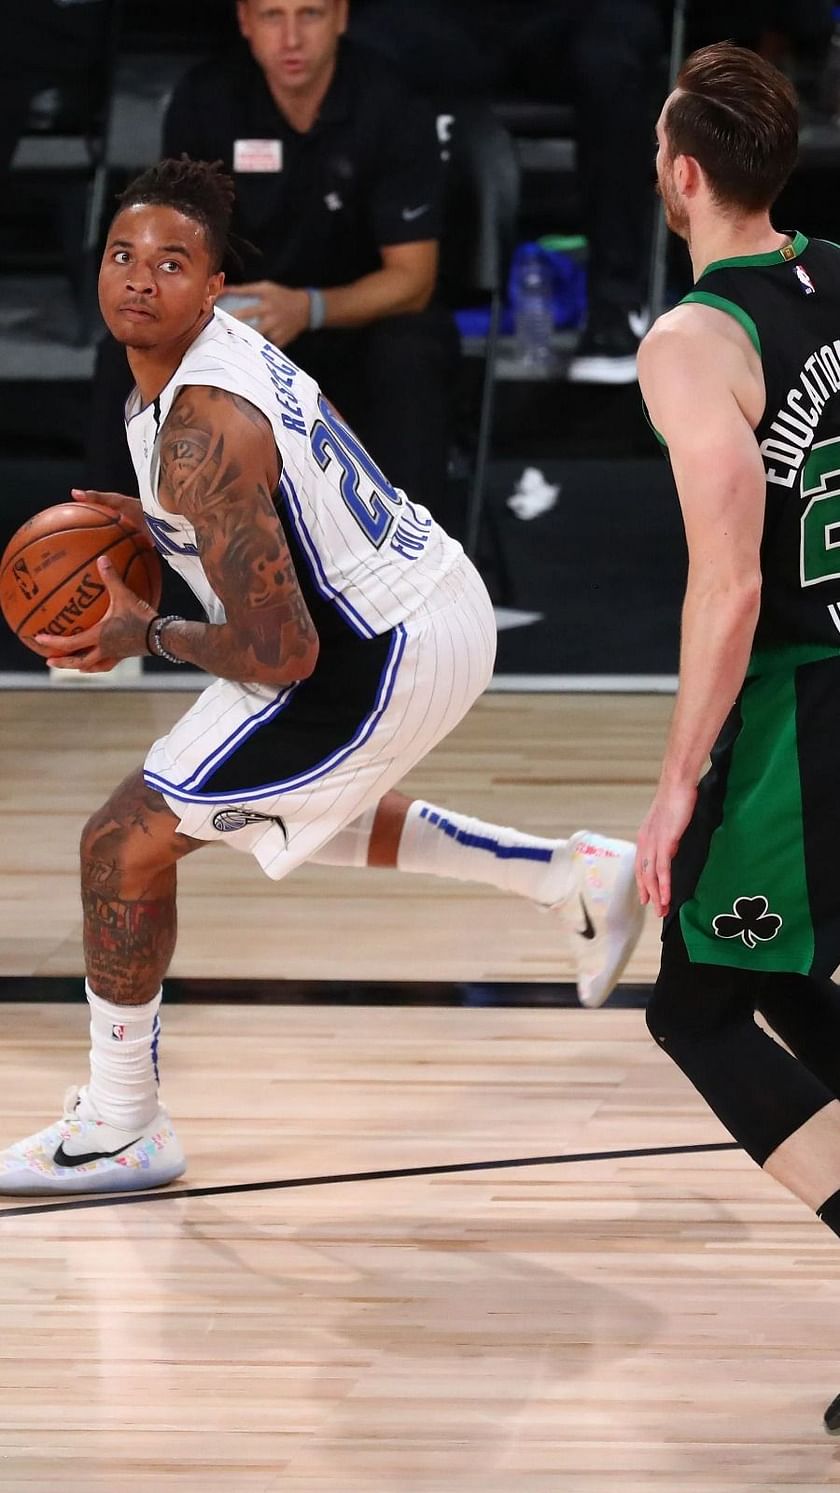 Celtics vs. Magic: Start time, where to watch, what's the latest